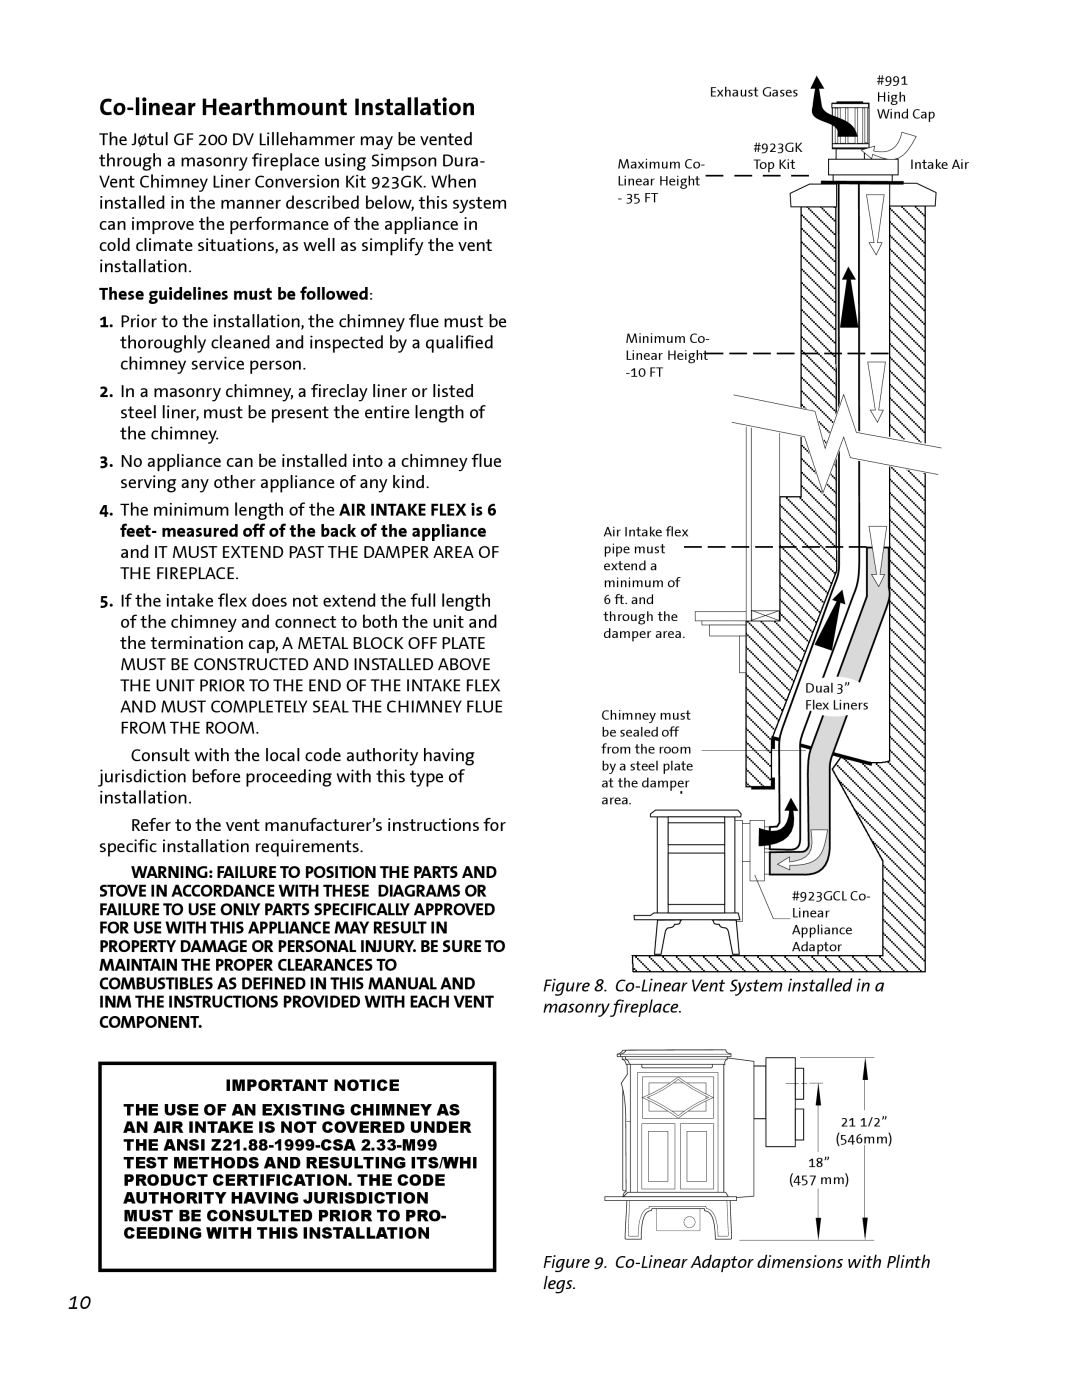 Jotul GF 200 DV manual Co-linearHearthmount Installation, These guidelines must be followed, Component 